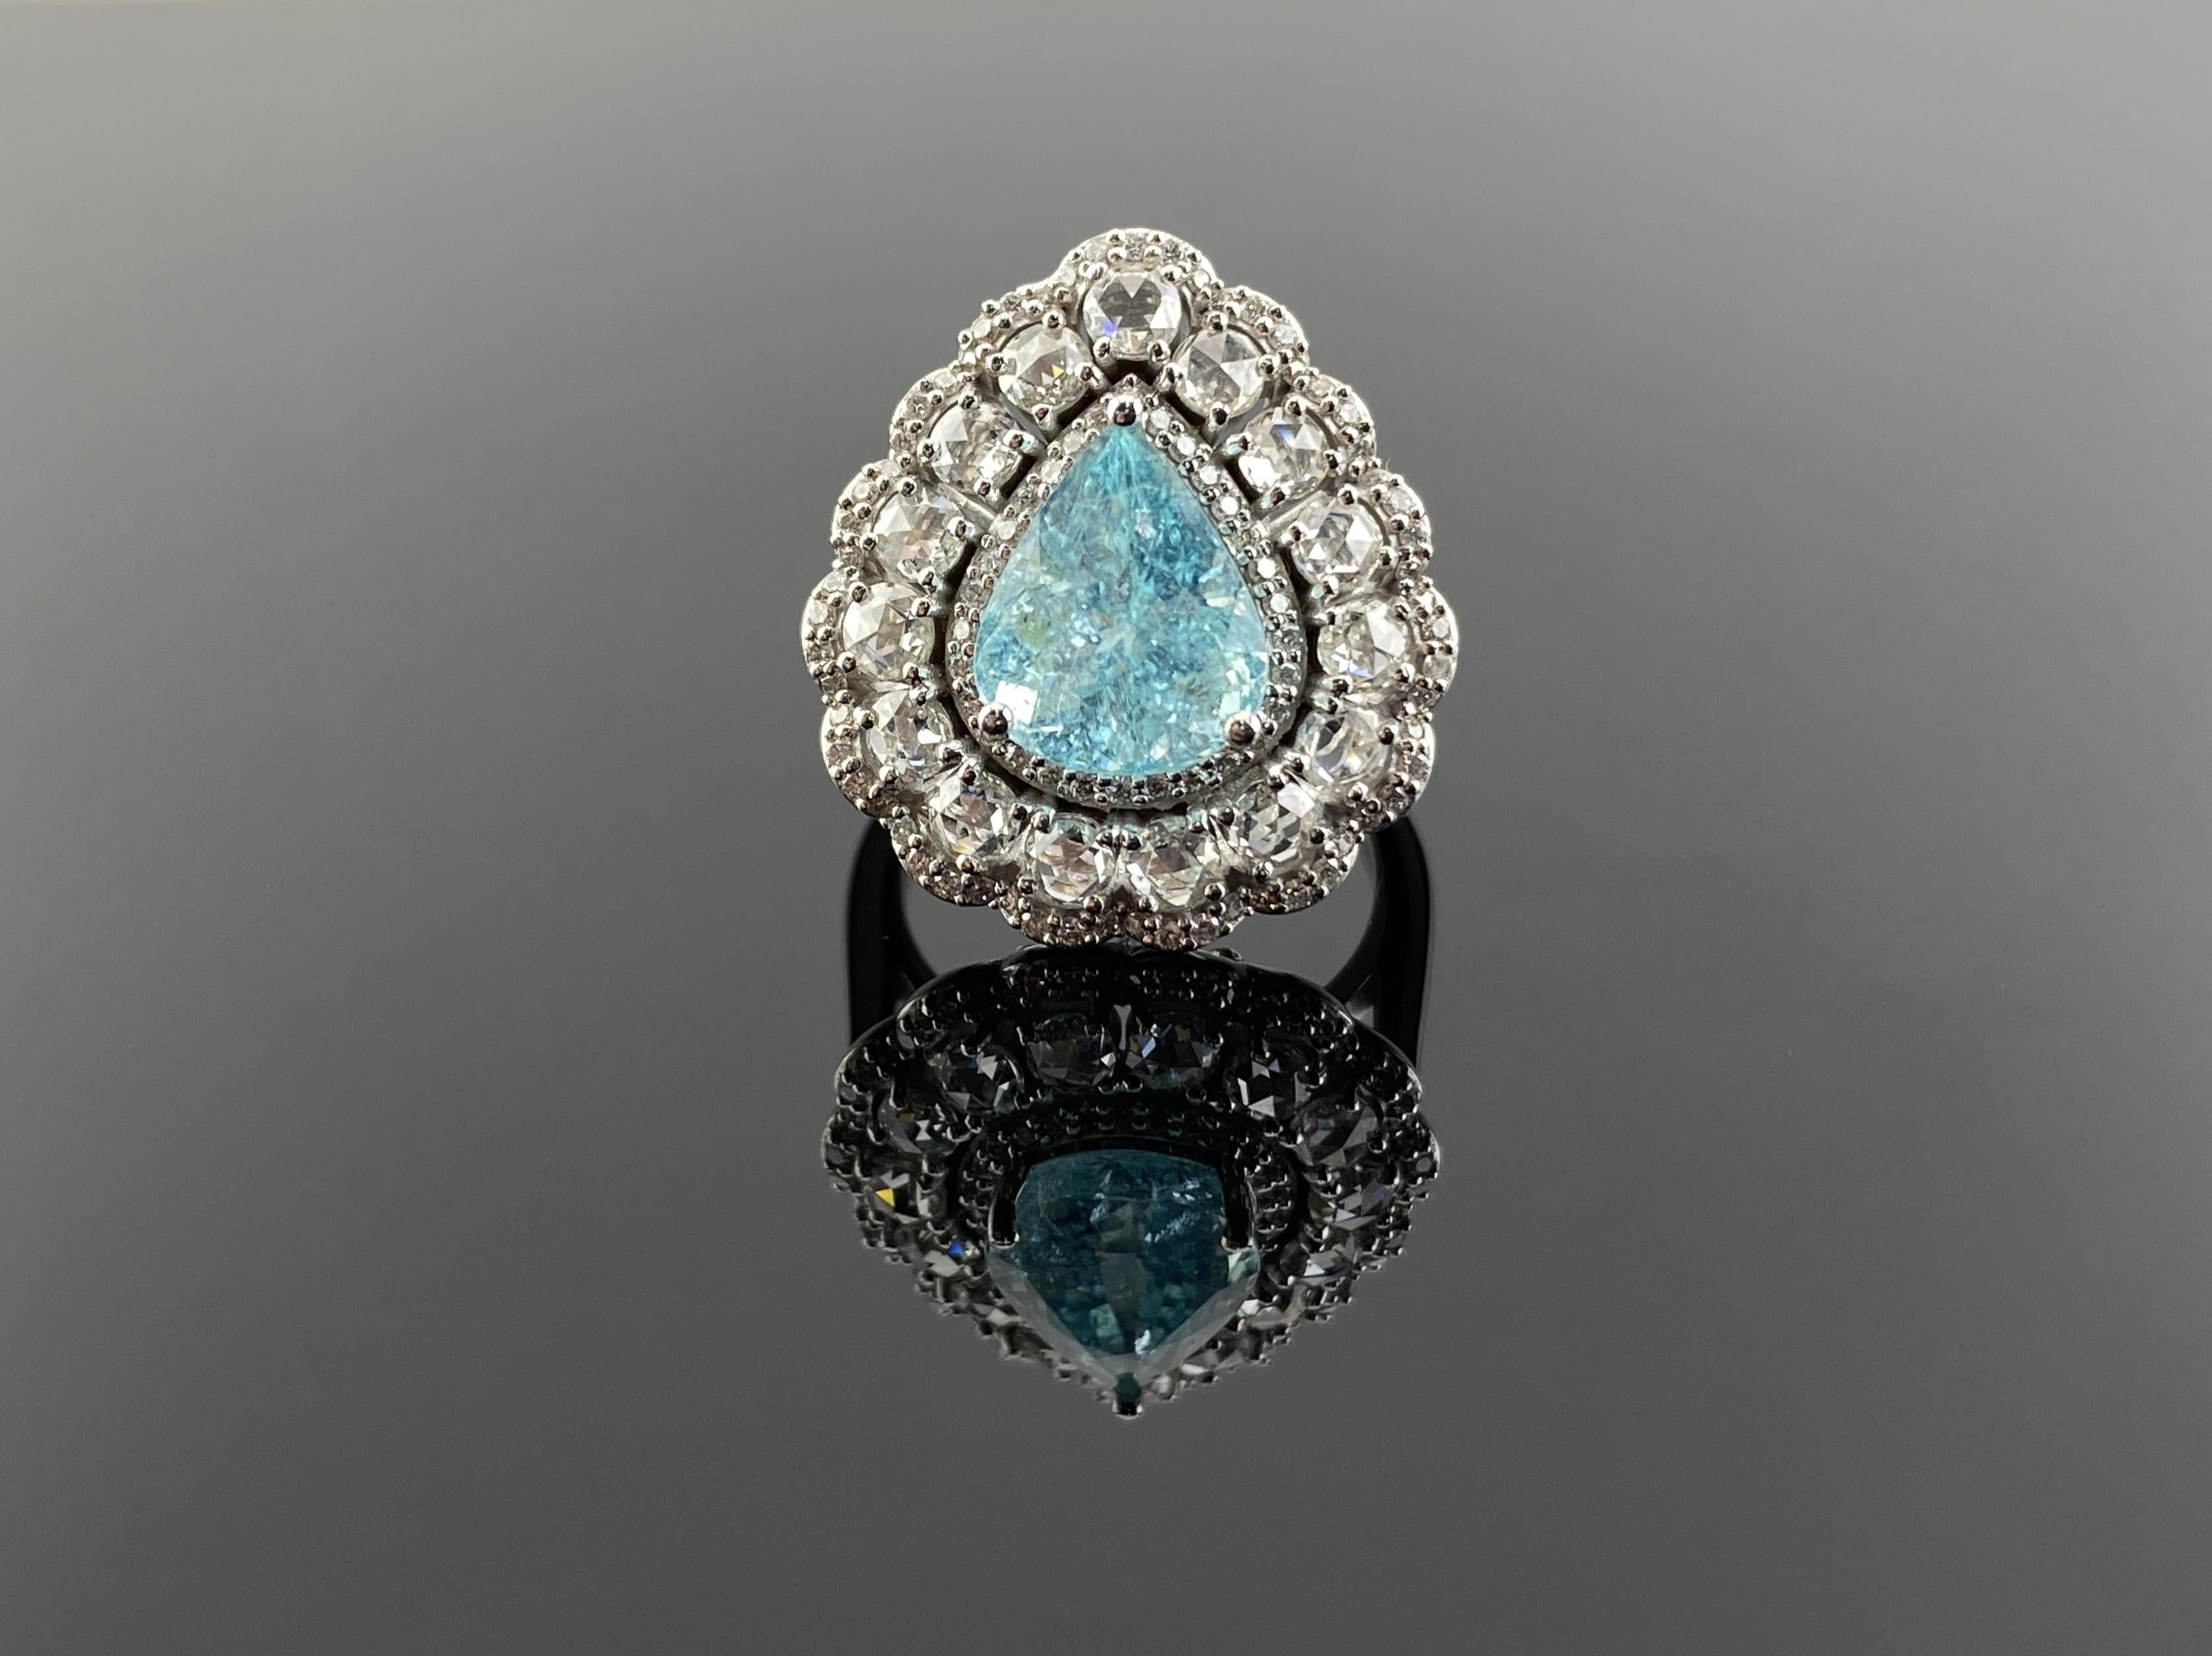 A stunning art-deco inspired 3.96 carat pear shape Paraiba Tourmaline cocktail ring, with 1.34 carats rose cut White Diamonds and 0.44 carat full cut Diamonds, all set in solid 18K White Gold. The ring is currently sized at US 7, can be resized. 
We